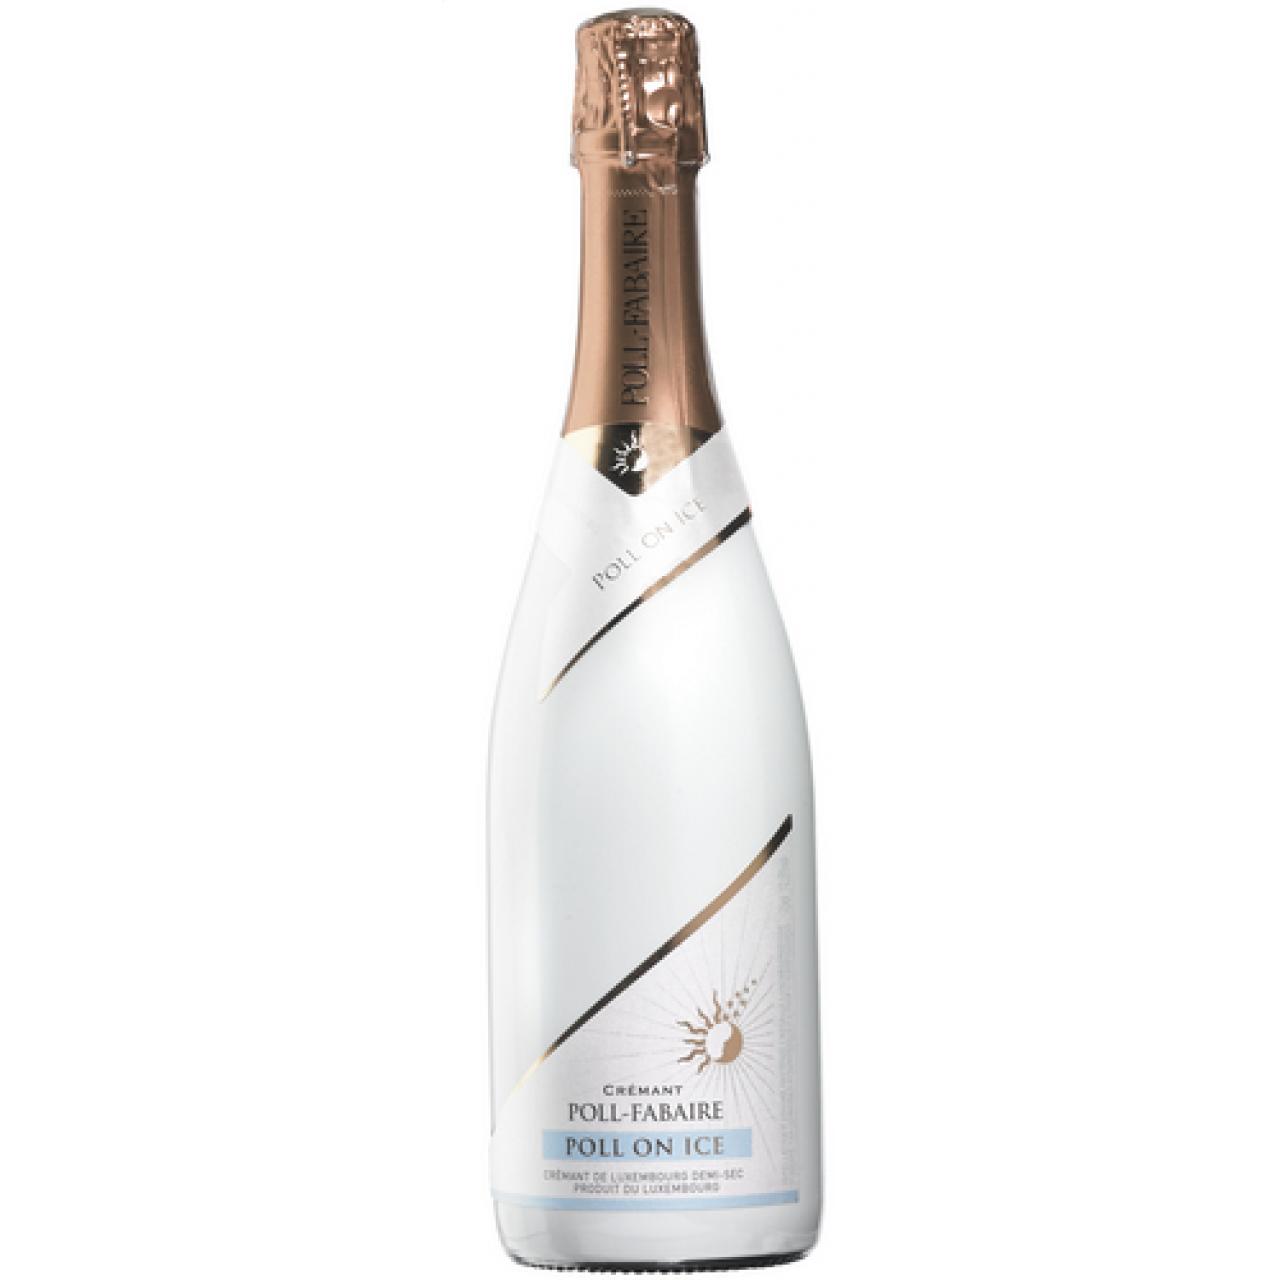 CREMANT LUX POLL ON ICE 75CL